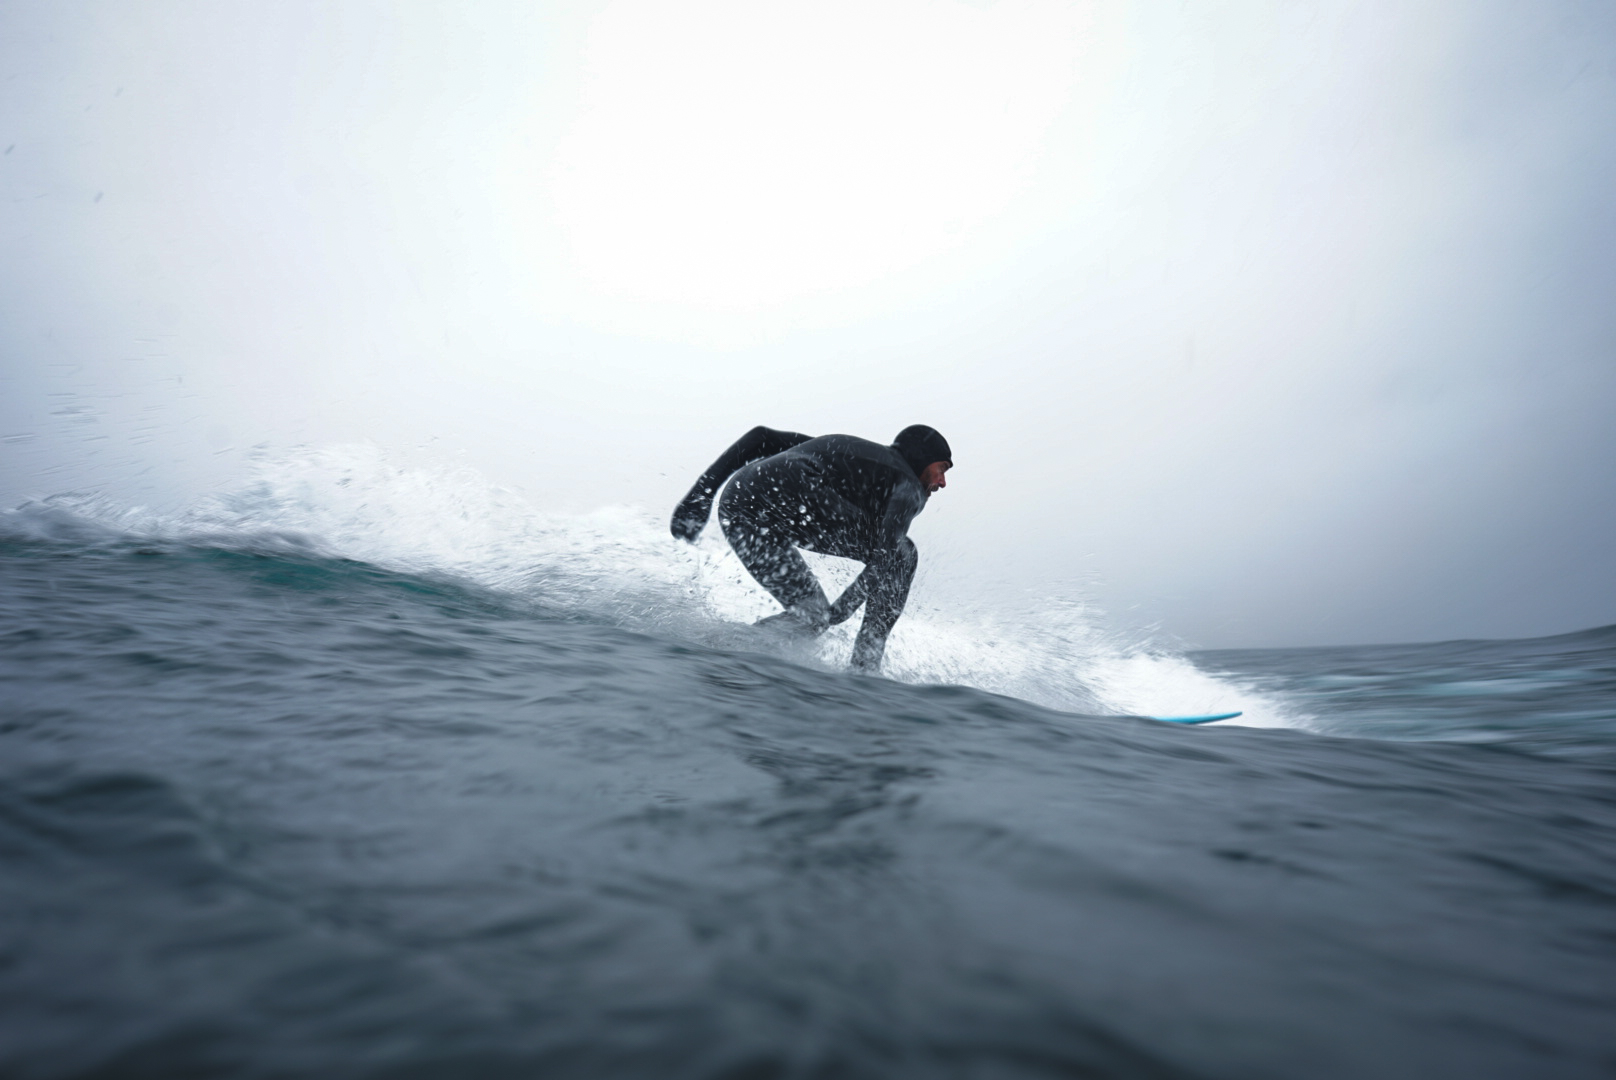 A surfer wearing a full wet suit catching a wave.